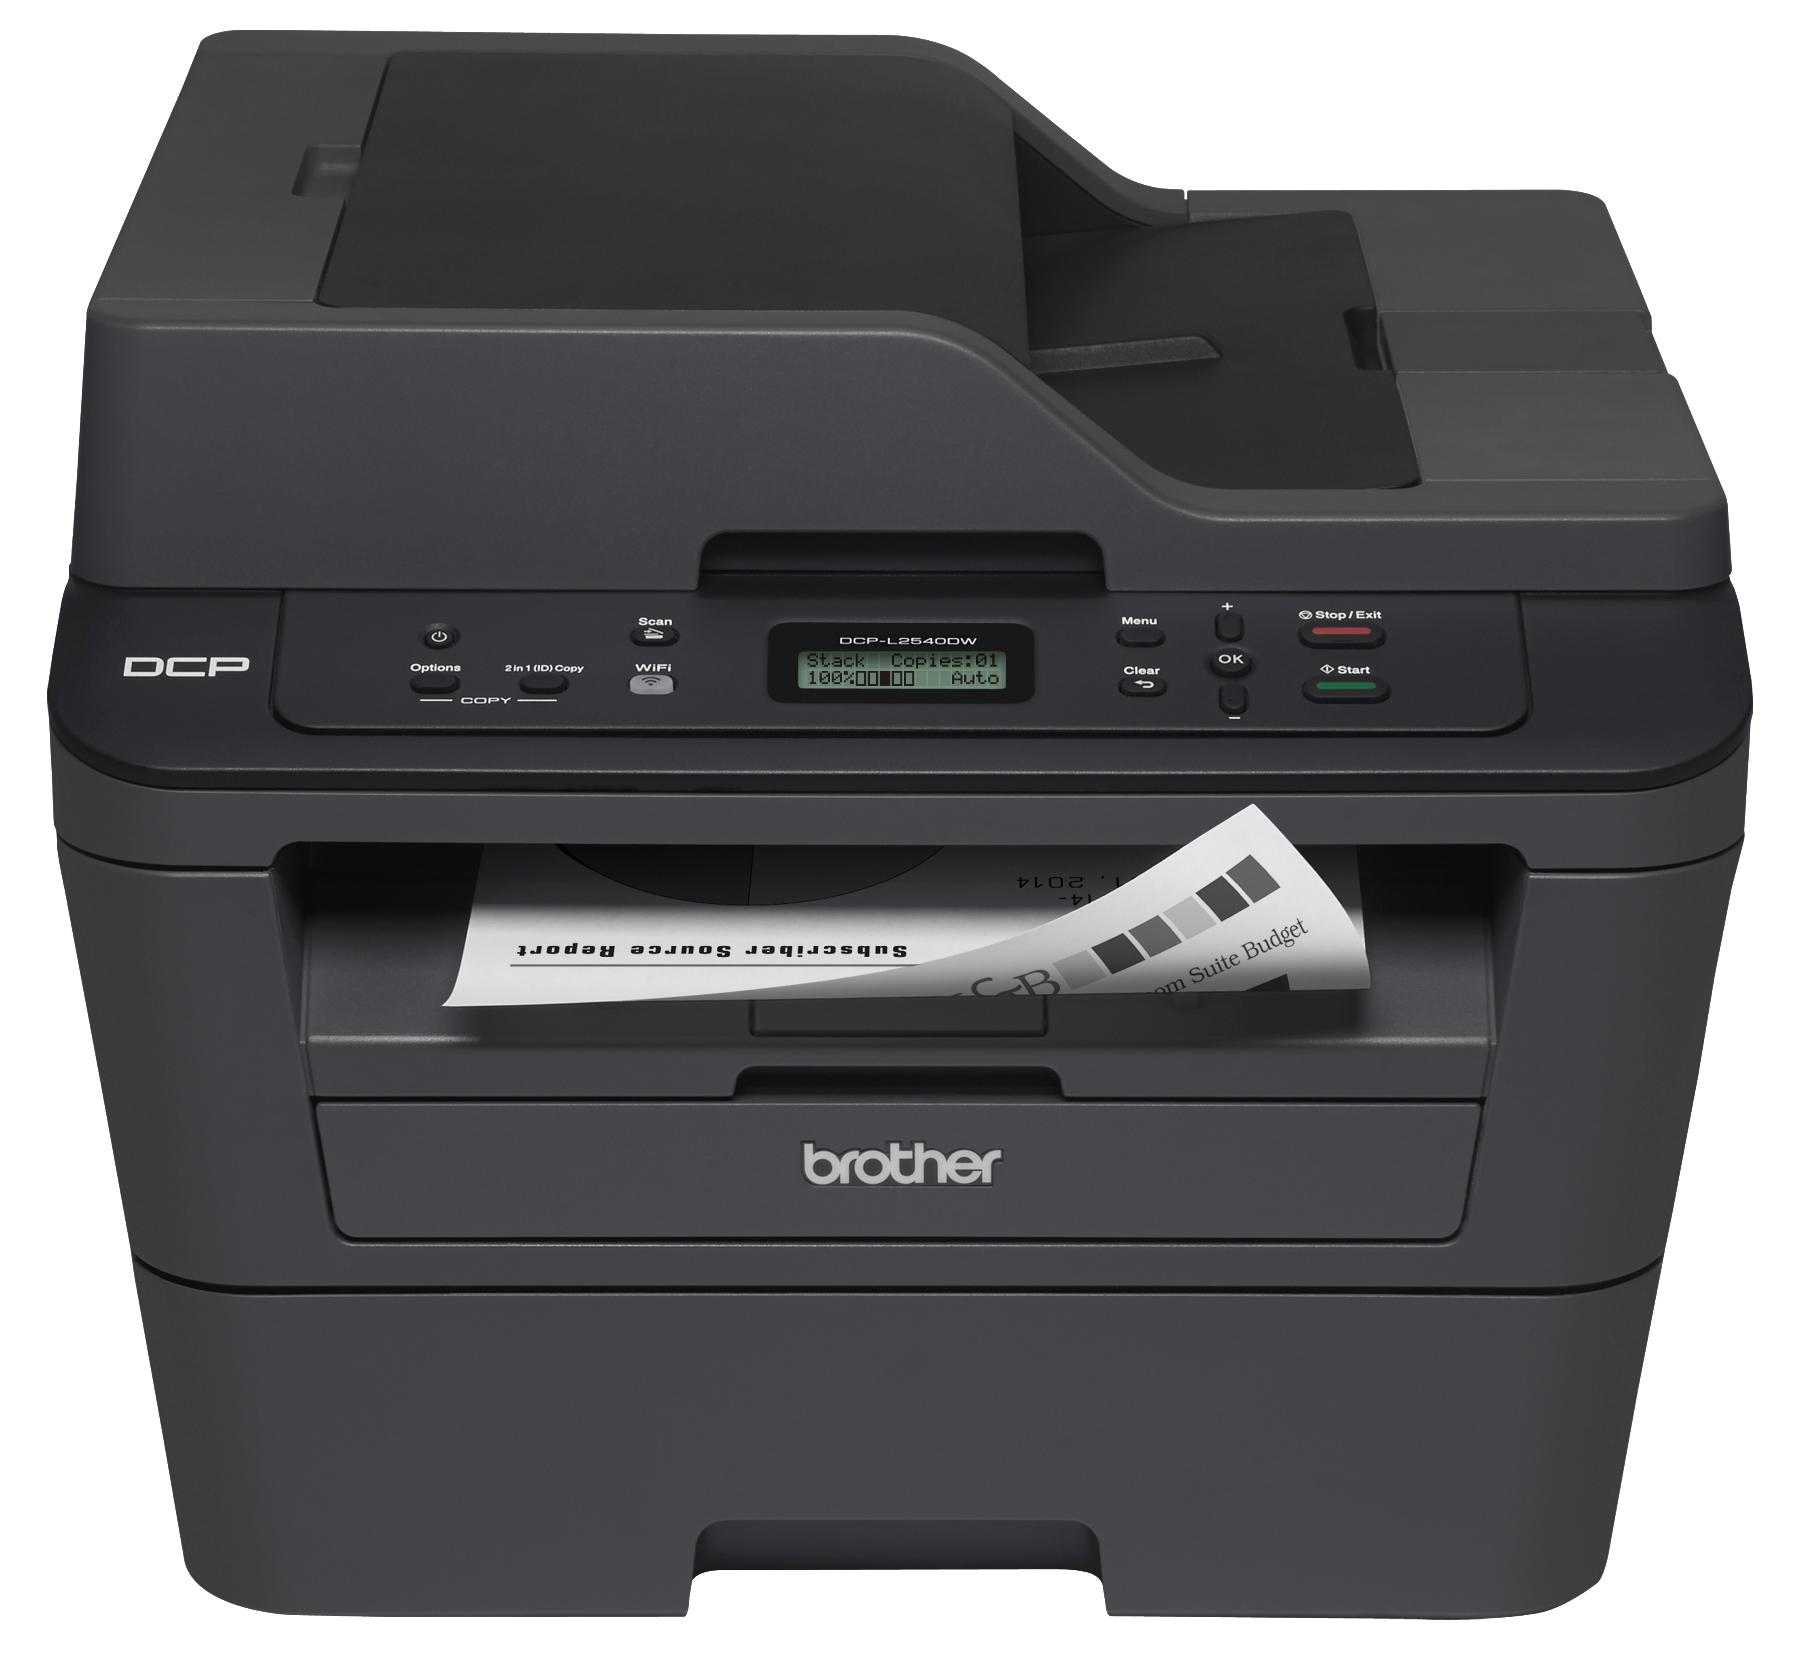 Brother DCP-L2540DW Multifunctional